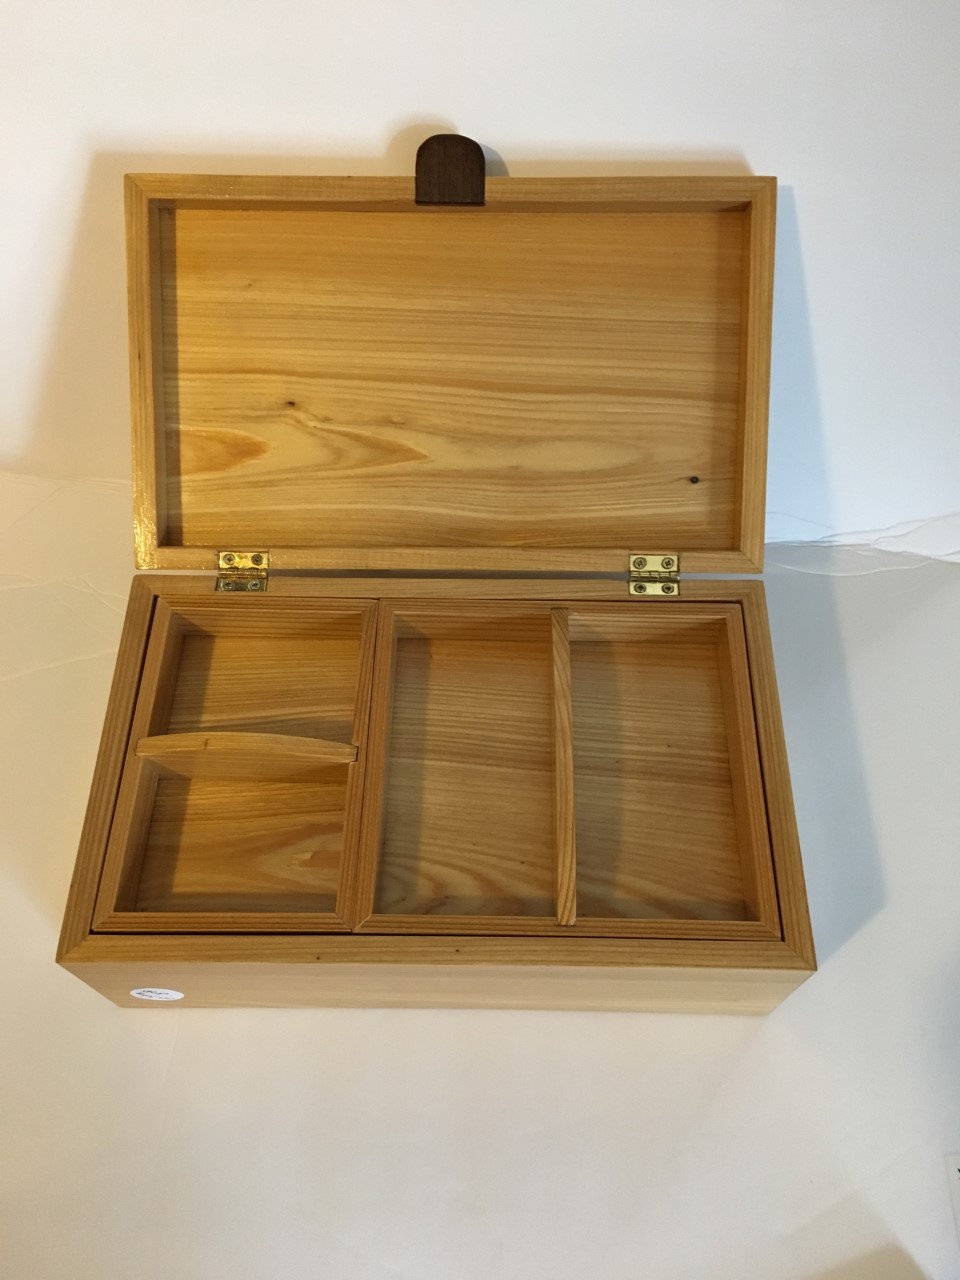 Handmade Wooden Keepsake Box Tolland, Handcrafted Wooden Memory Boxes